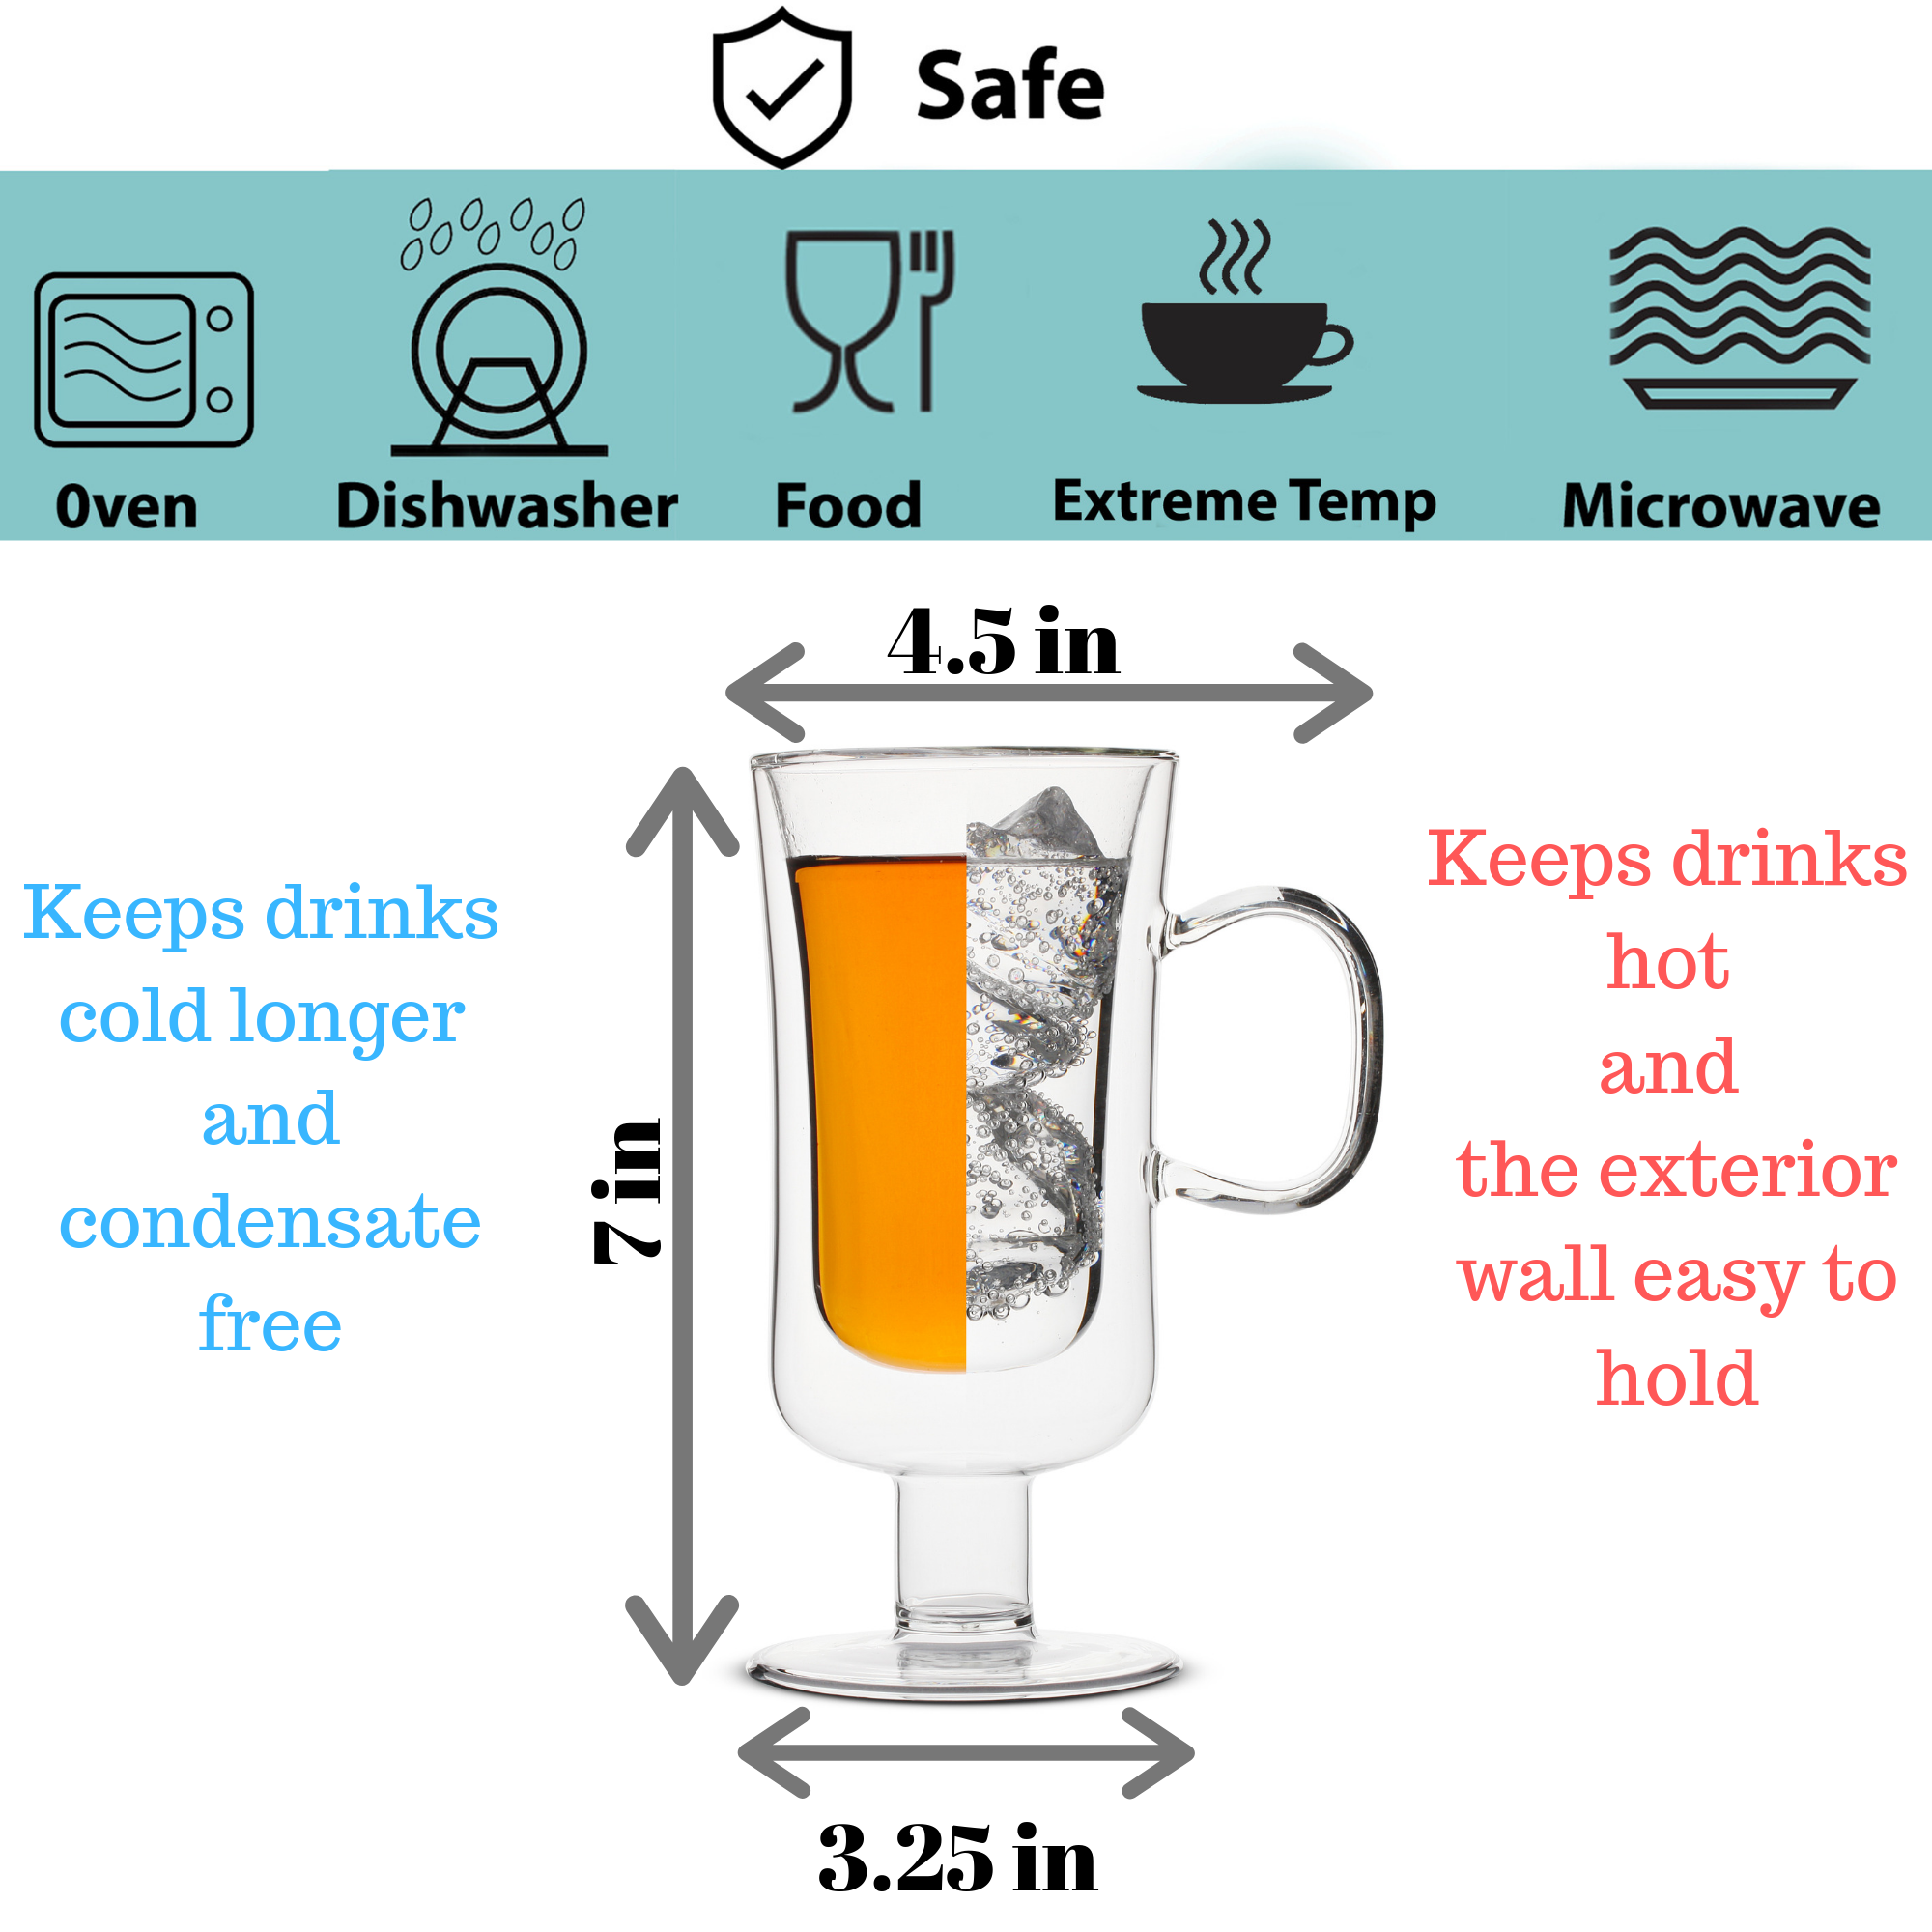 https://www.brewtoatea.com/wp-content/uploads/2019/10/Keeps-drink-cold-longer-and-condensate-free.png